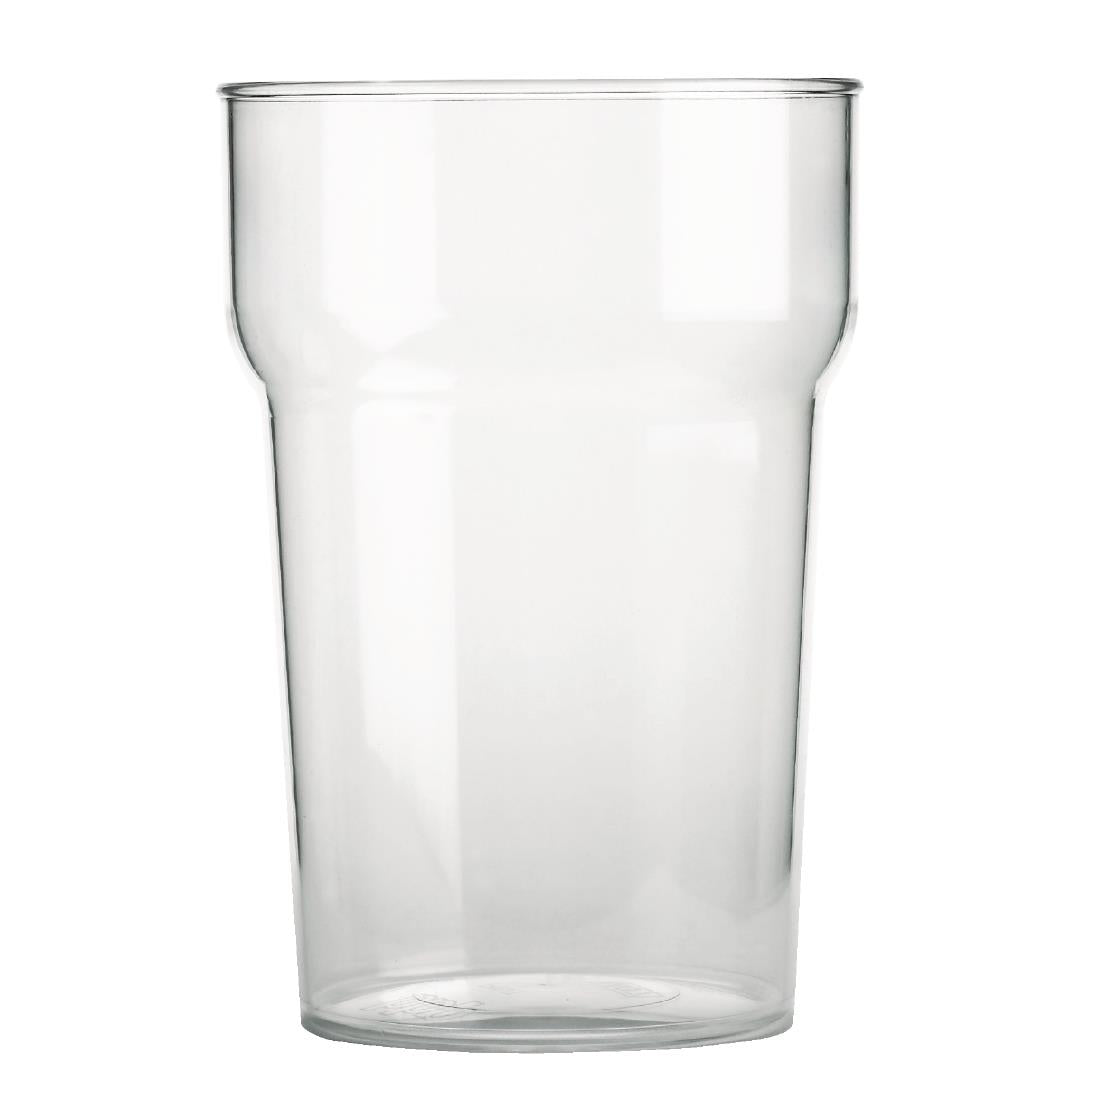 BBP Polycarbonate Nonic Pint Glasses 570ml CE Marked (Pack of 48) JD Catering Equipment Solutions Ltd